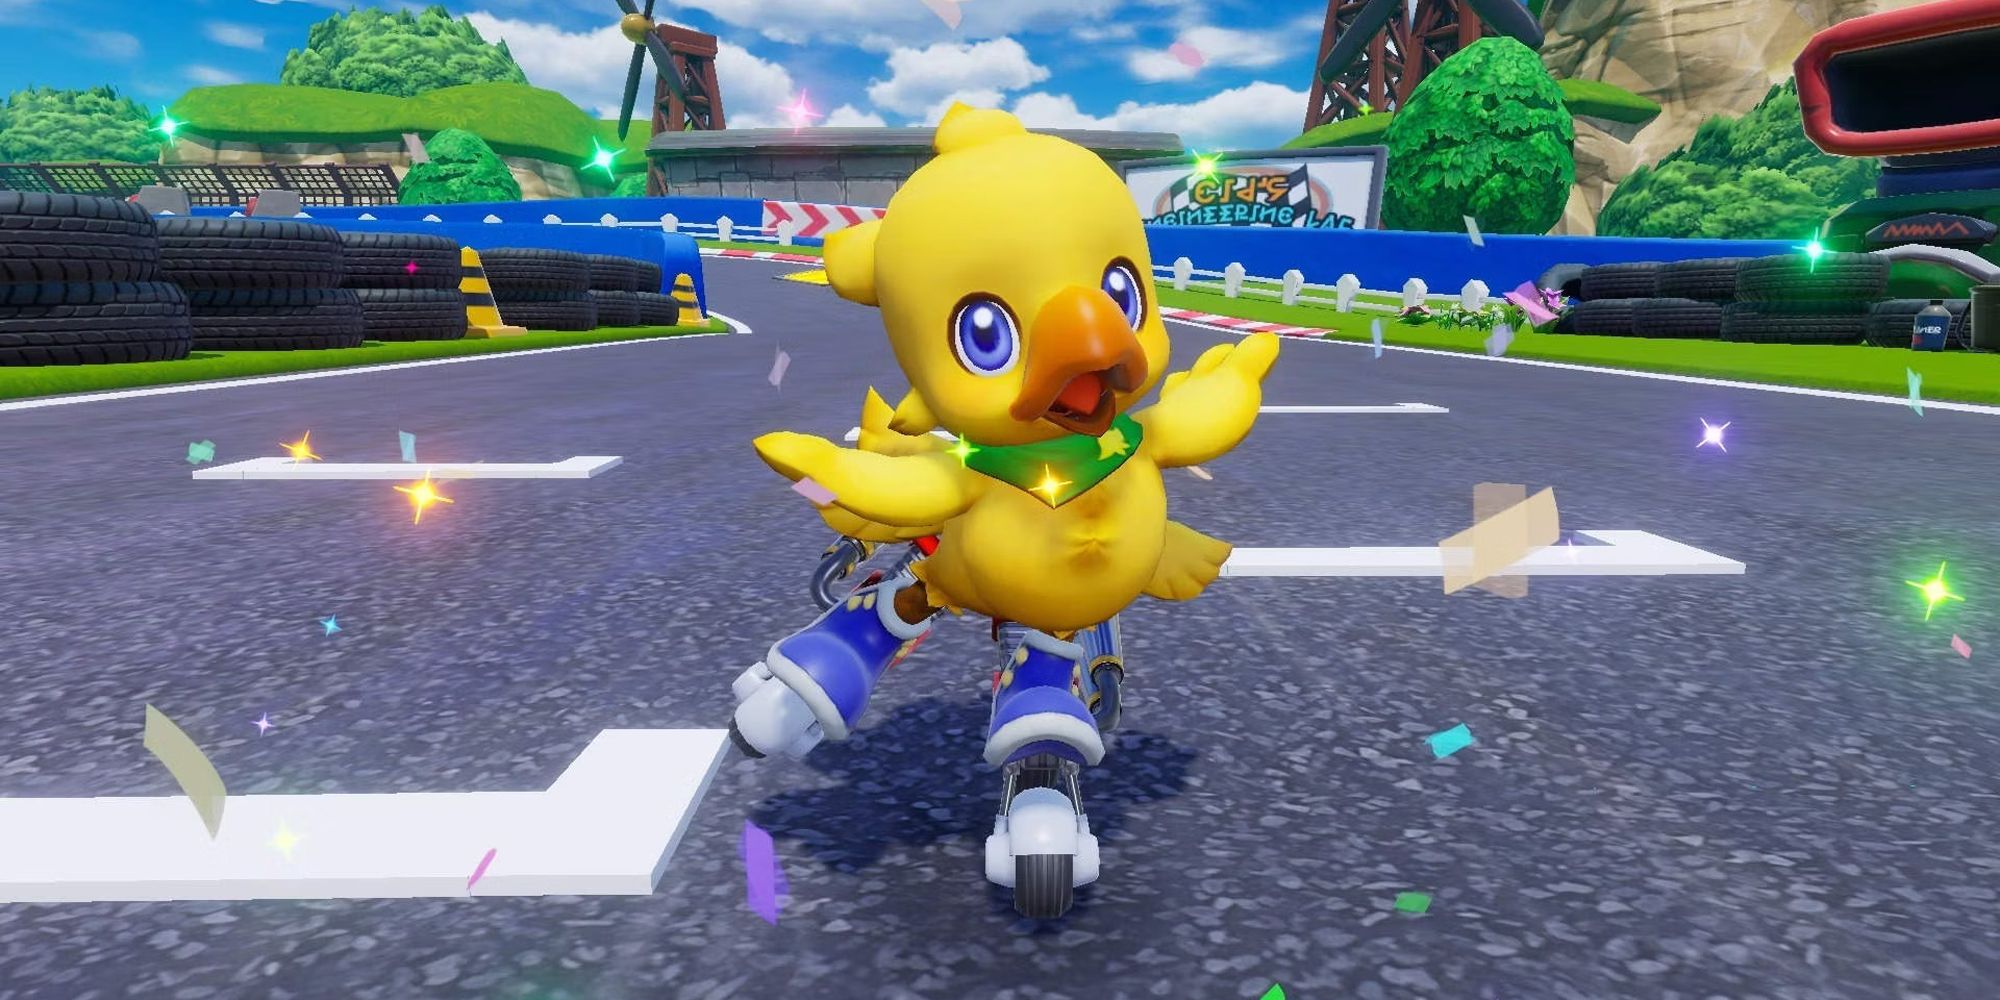 Chocobo (a little yellow chick-like bird) skating down a road.